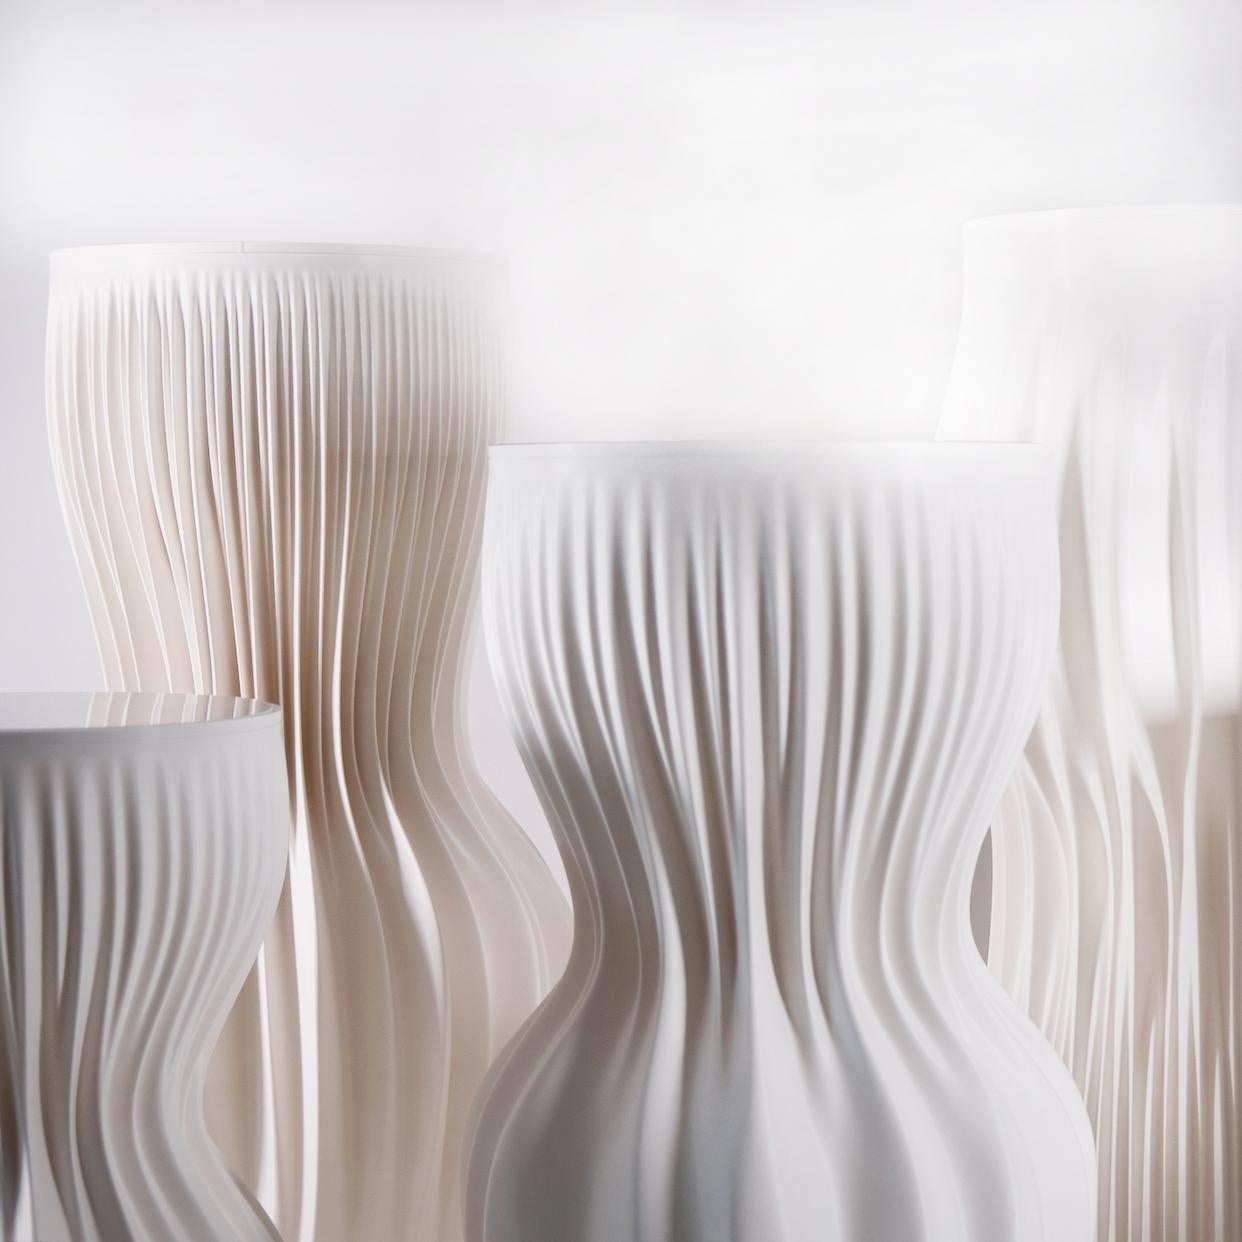 The Lamella pedestals consists of fully 3D-printed pedestals that vary in form, size and purpose. This listing is for the tall lamella pedestal. The Lamella series are part of the permanent collection of the MAK (Museum of Applied Arts) in